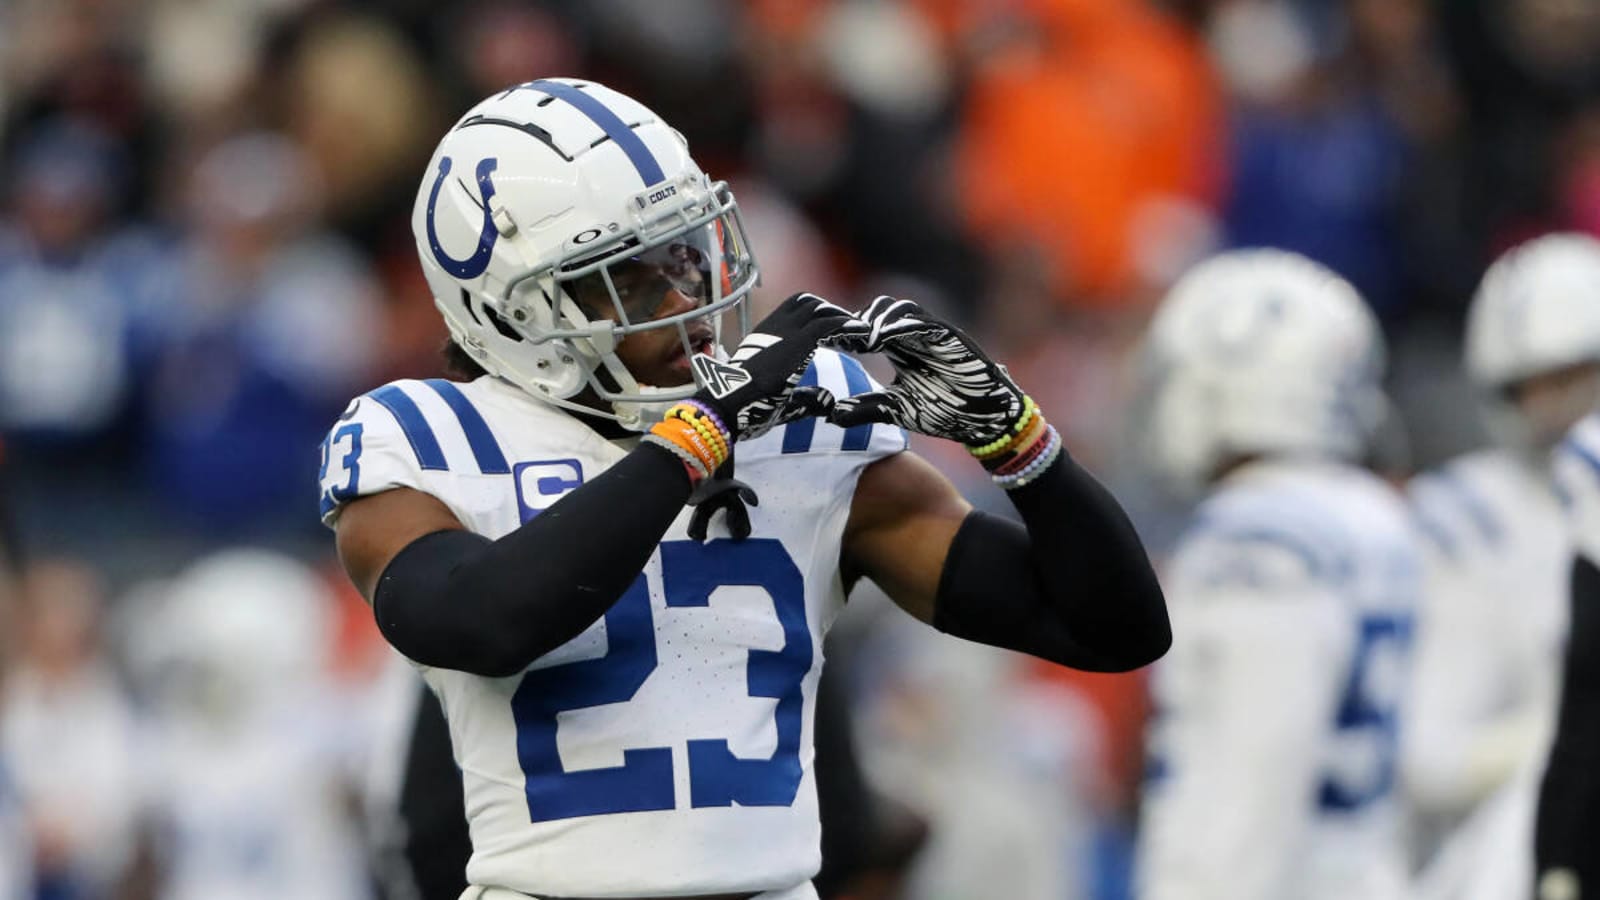 7 important Colts stories to know ahead of their Week 15 matchup vs. the Steelers